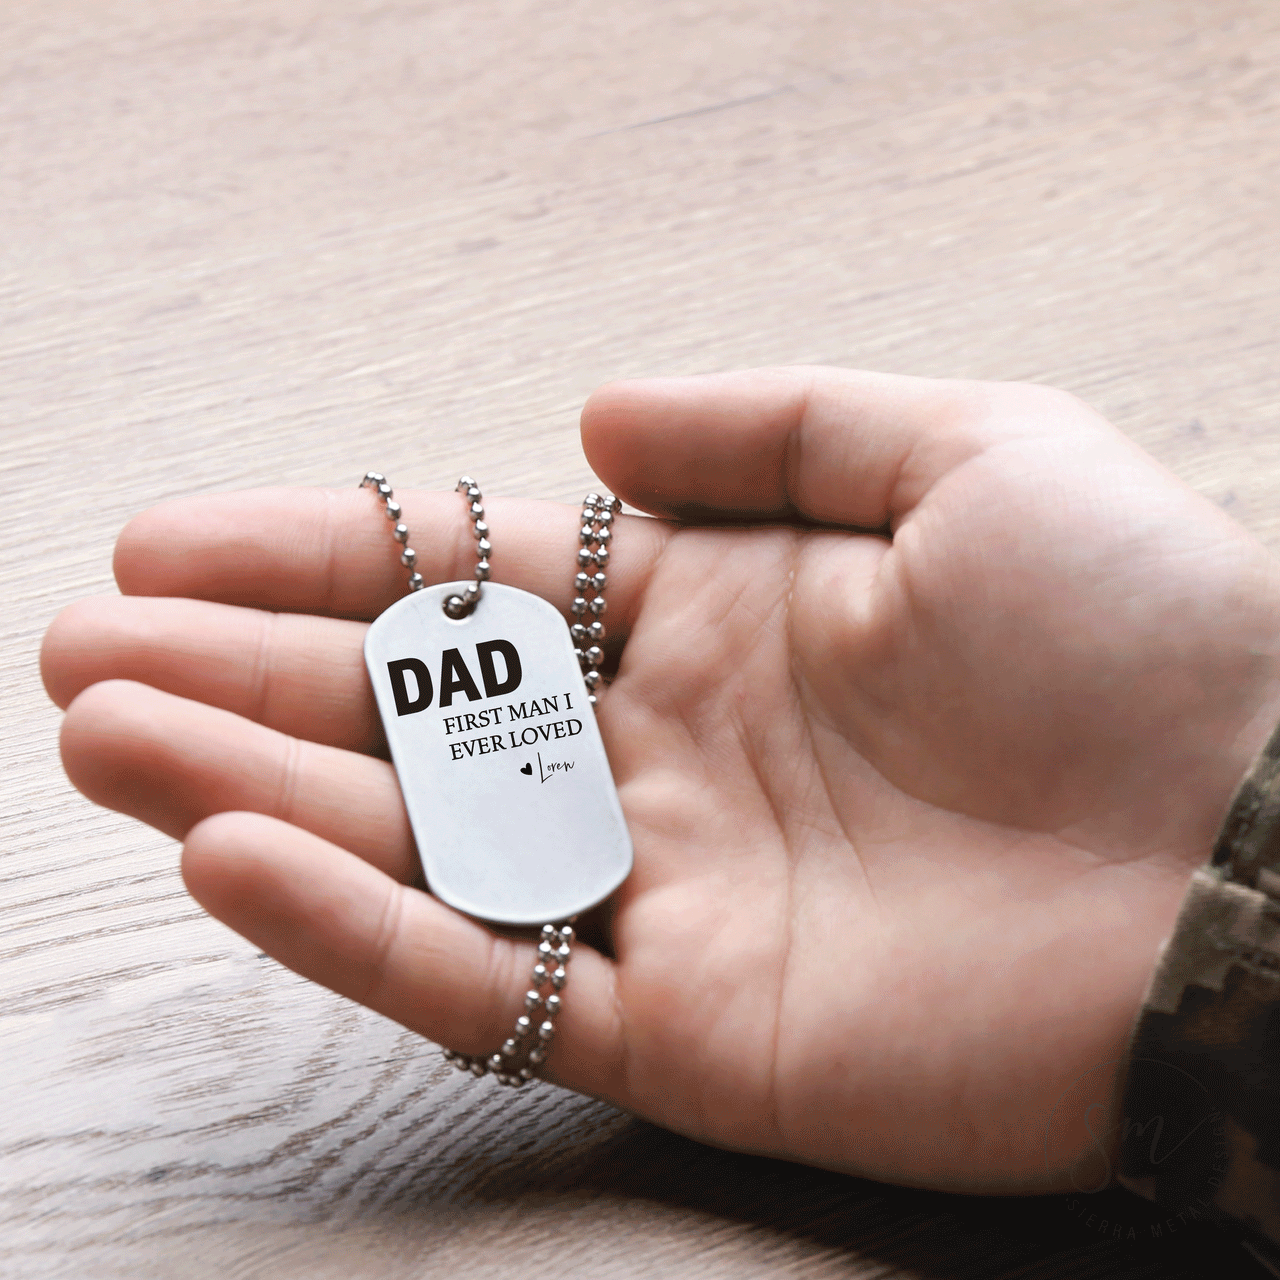 Dog Tag First Man I Ever Loved Necklace